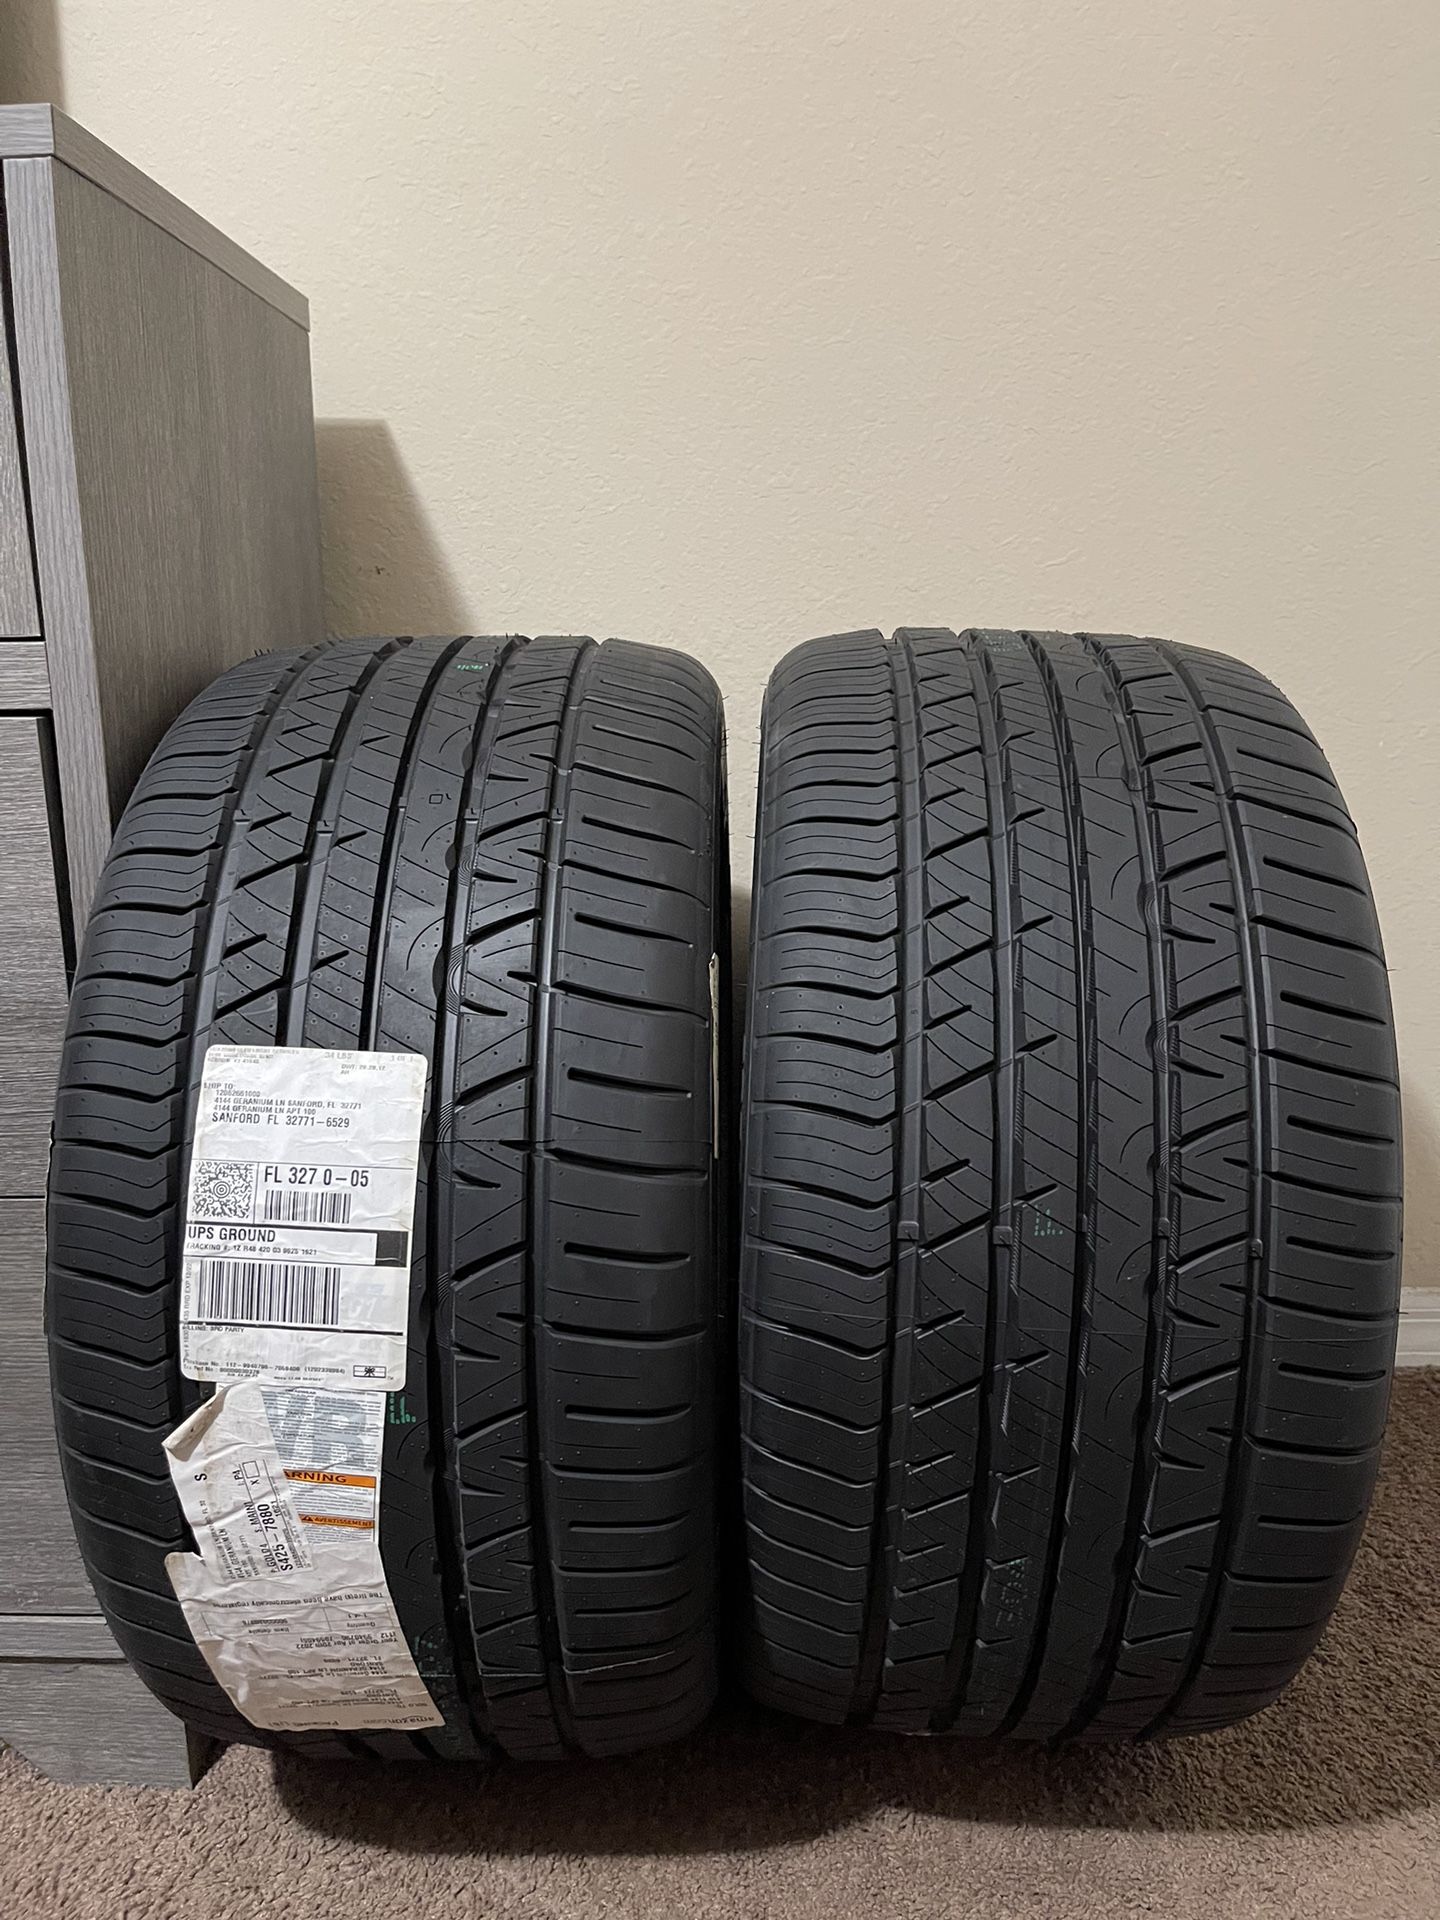 New Tires 305/35/20 